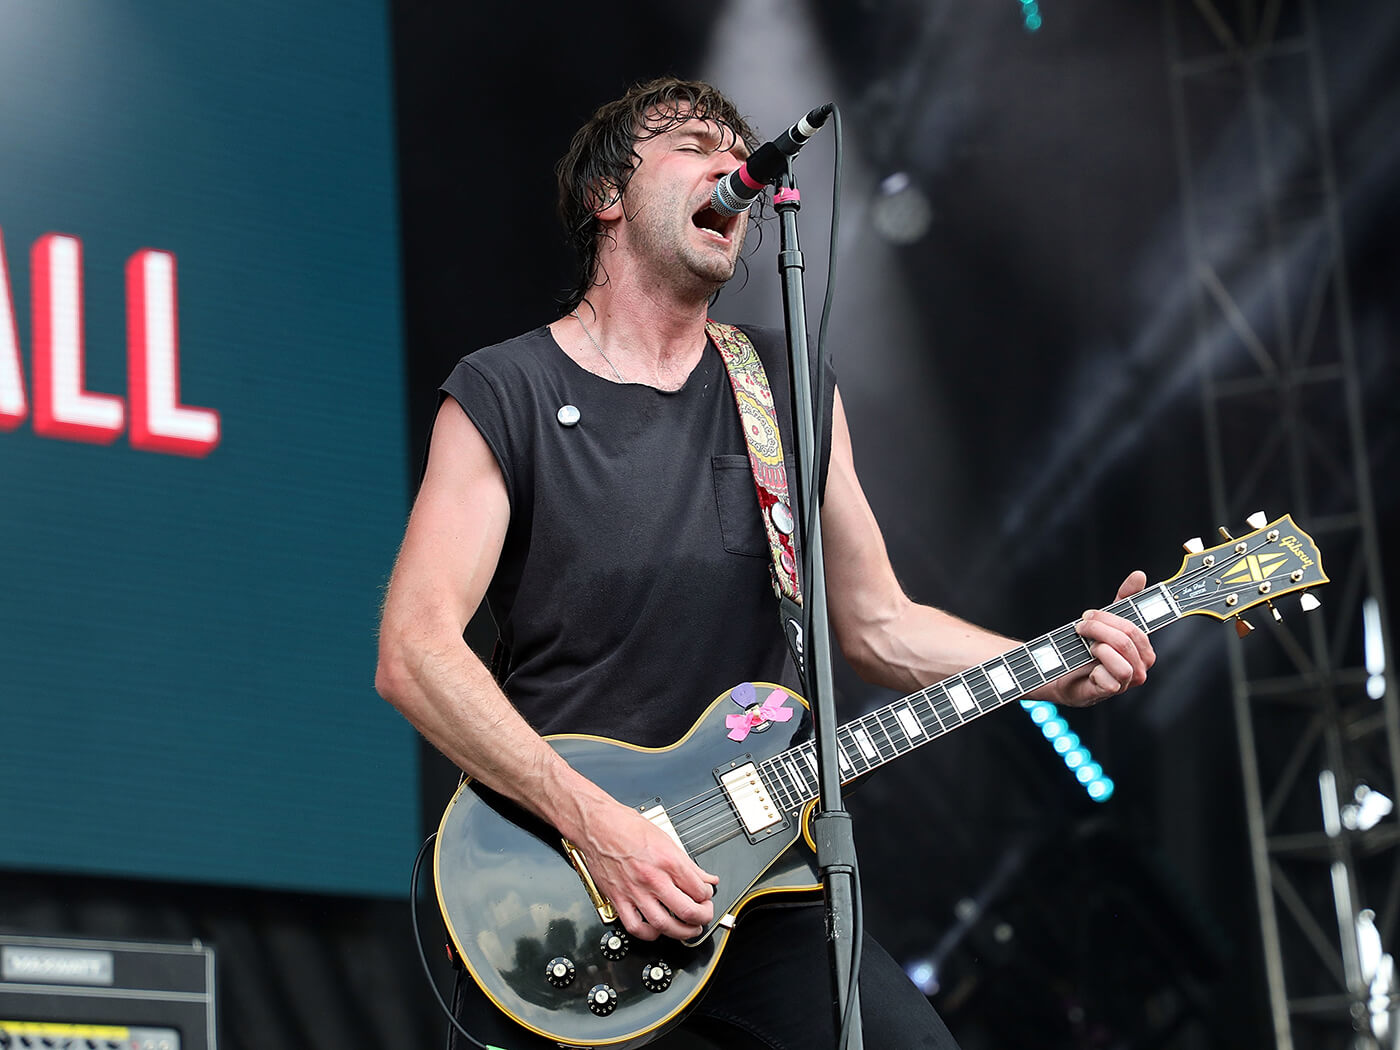 Brian King of Japandroids